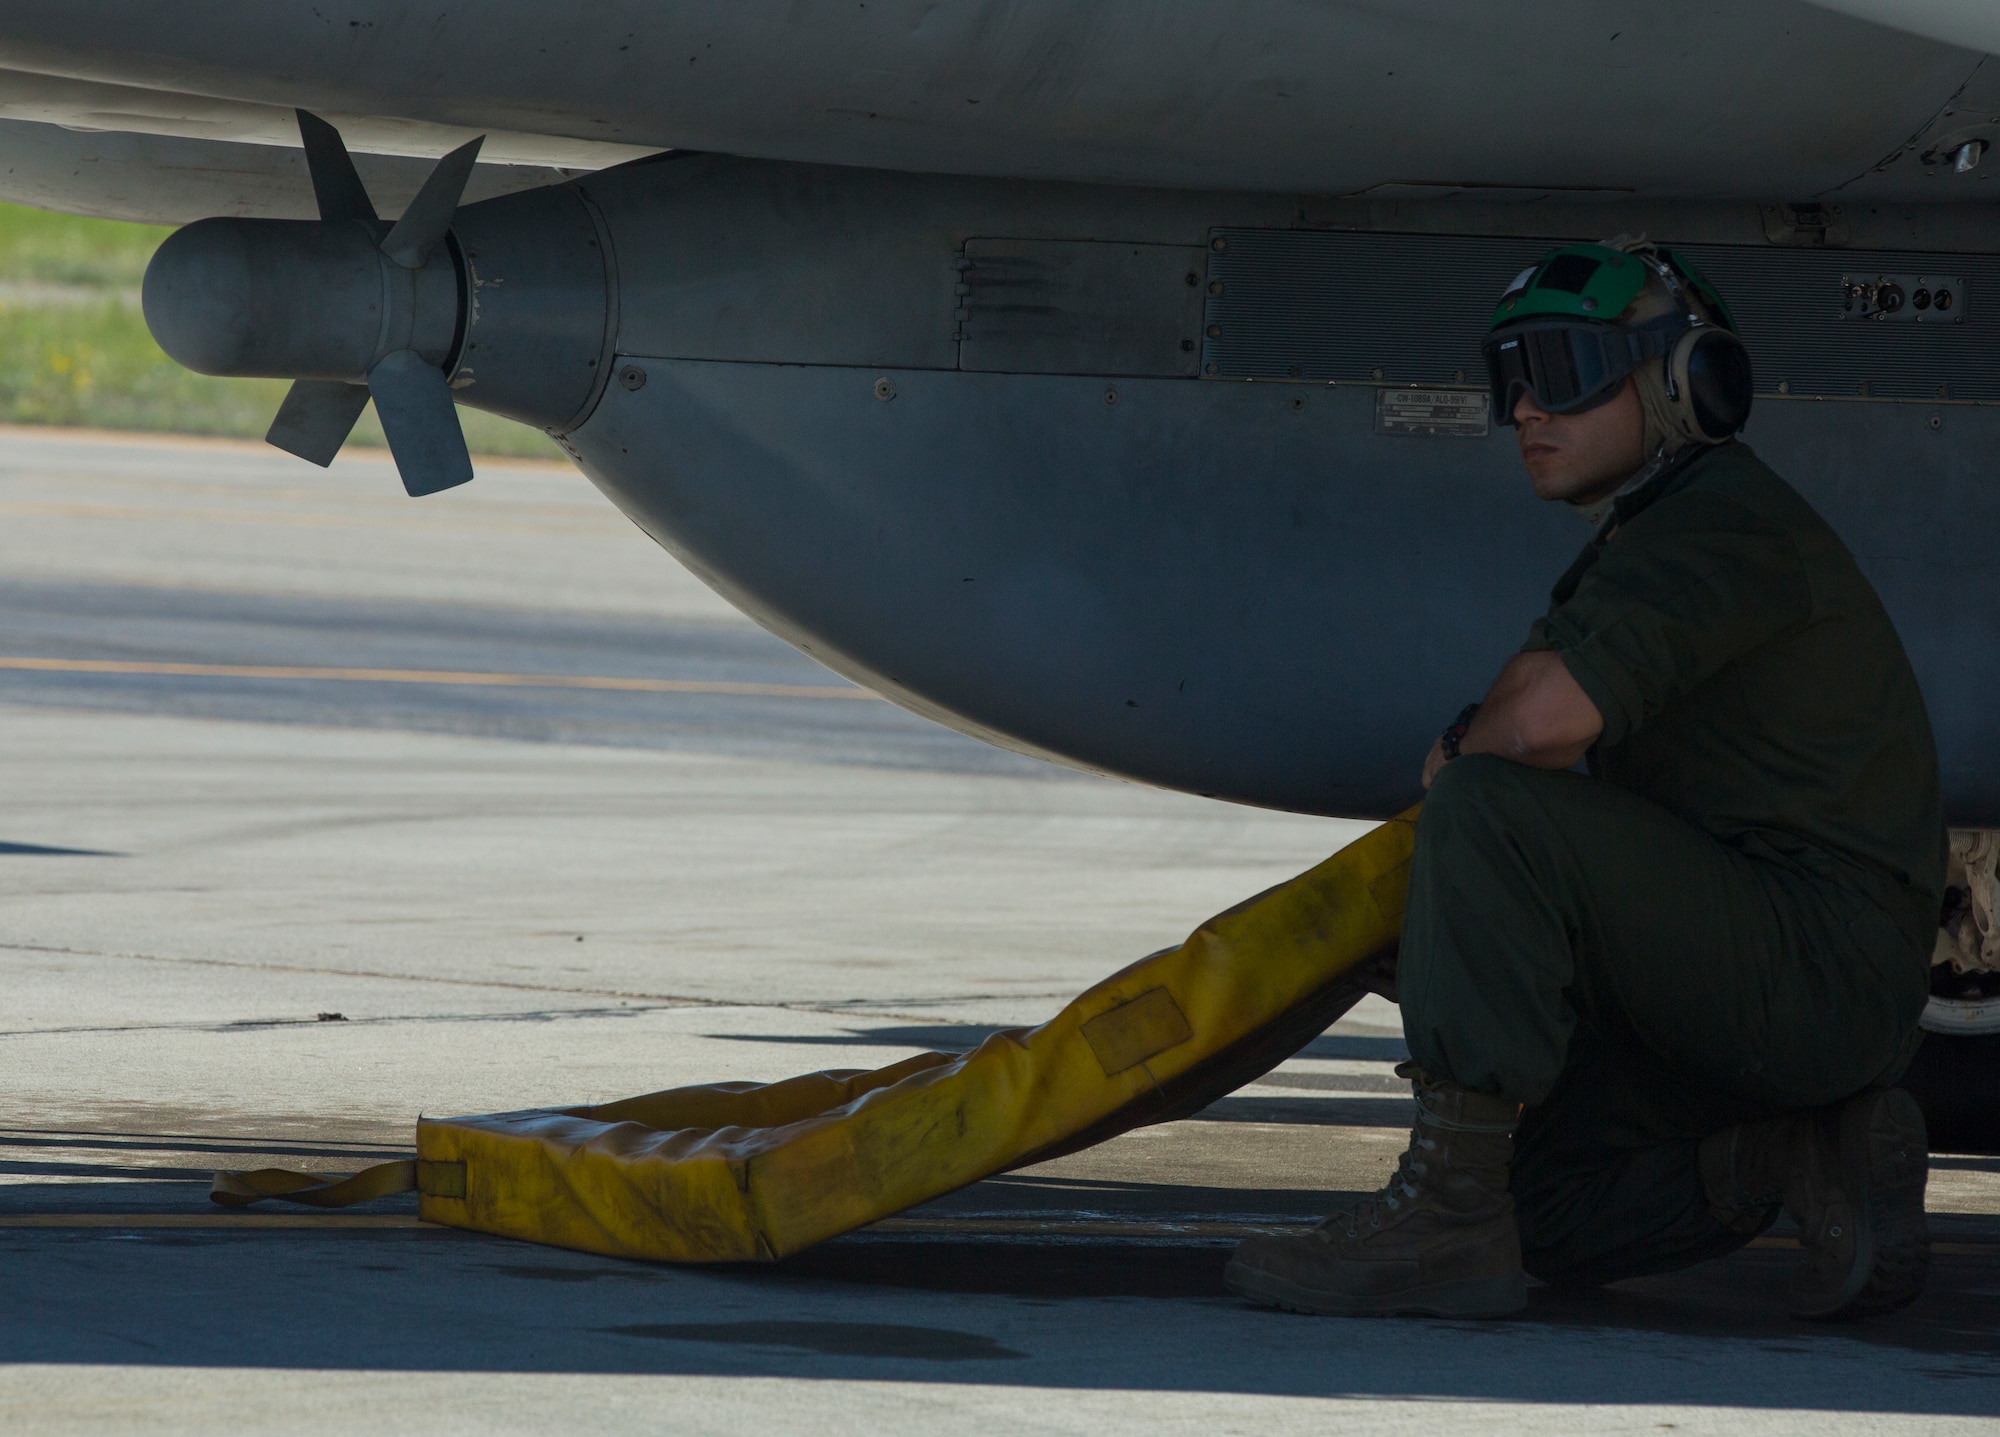 U.S. Marine Corps Cpl. Nestor Vega, an electronic counter measure with Marine Tactical Electronic Warfare Squadron (VMAQ) 2, 2nd Marine Aircraft Wing, works underneath a Marine Corps EA-6B Prowler assigned to VMAQ-2 while performing routine maintenance on the aircraft during Exercise Northern Edge 15 at Eielson Air Force Base, Alaska, June 15, 2015. Northern Edge is Alaska’s premier joint training exercise designed to practice operations, techniques and procedures as well as enhance interoperability among the services. Thousands of participants from all services, Airmen, Soldiers, Sailors, Marines and Coast Guardsmen from active duty, Reserve and National Guard units are involved. (U.S. Marine Corps photo by Cpl. Suzanne Dickson/Released)